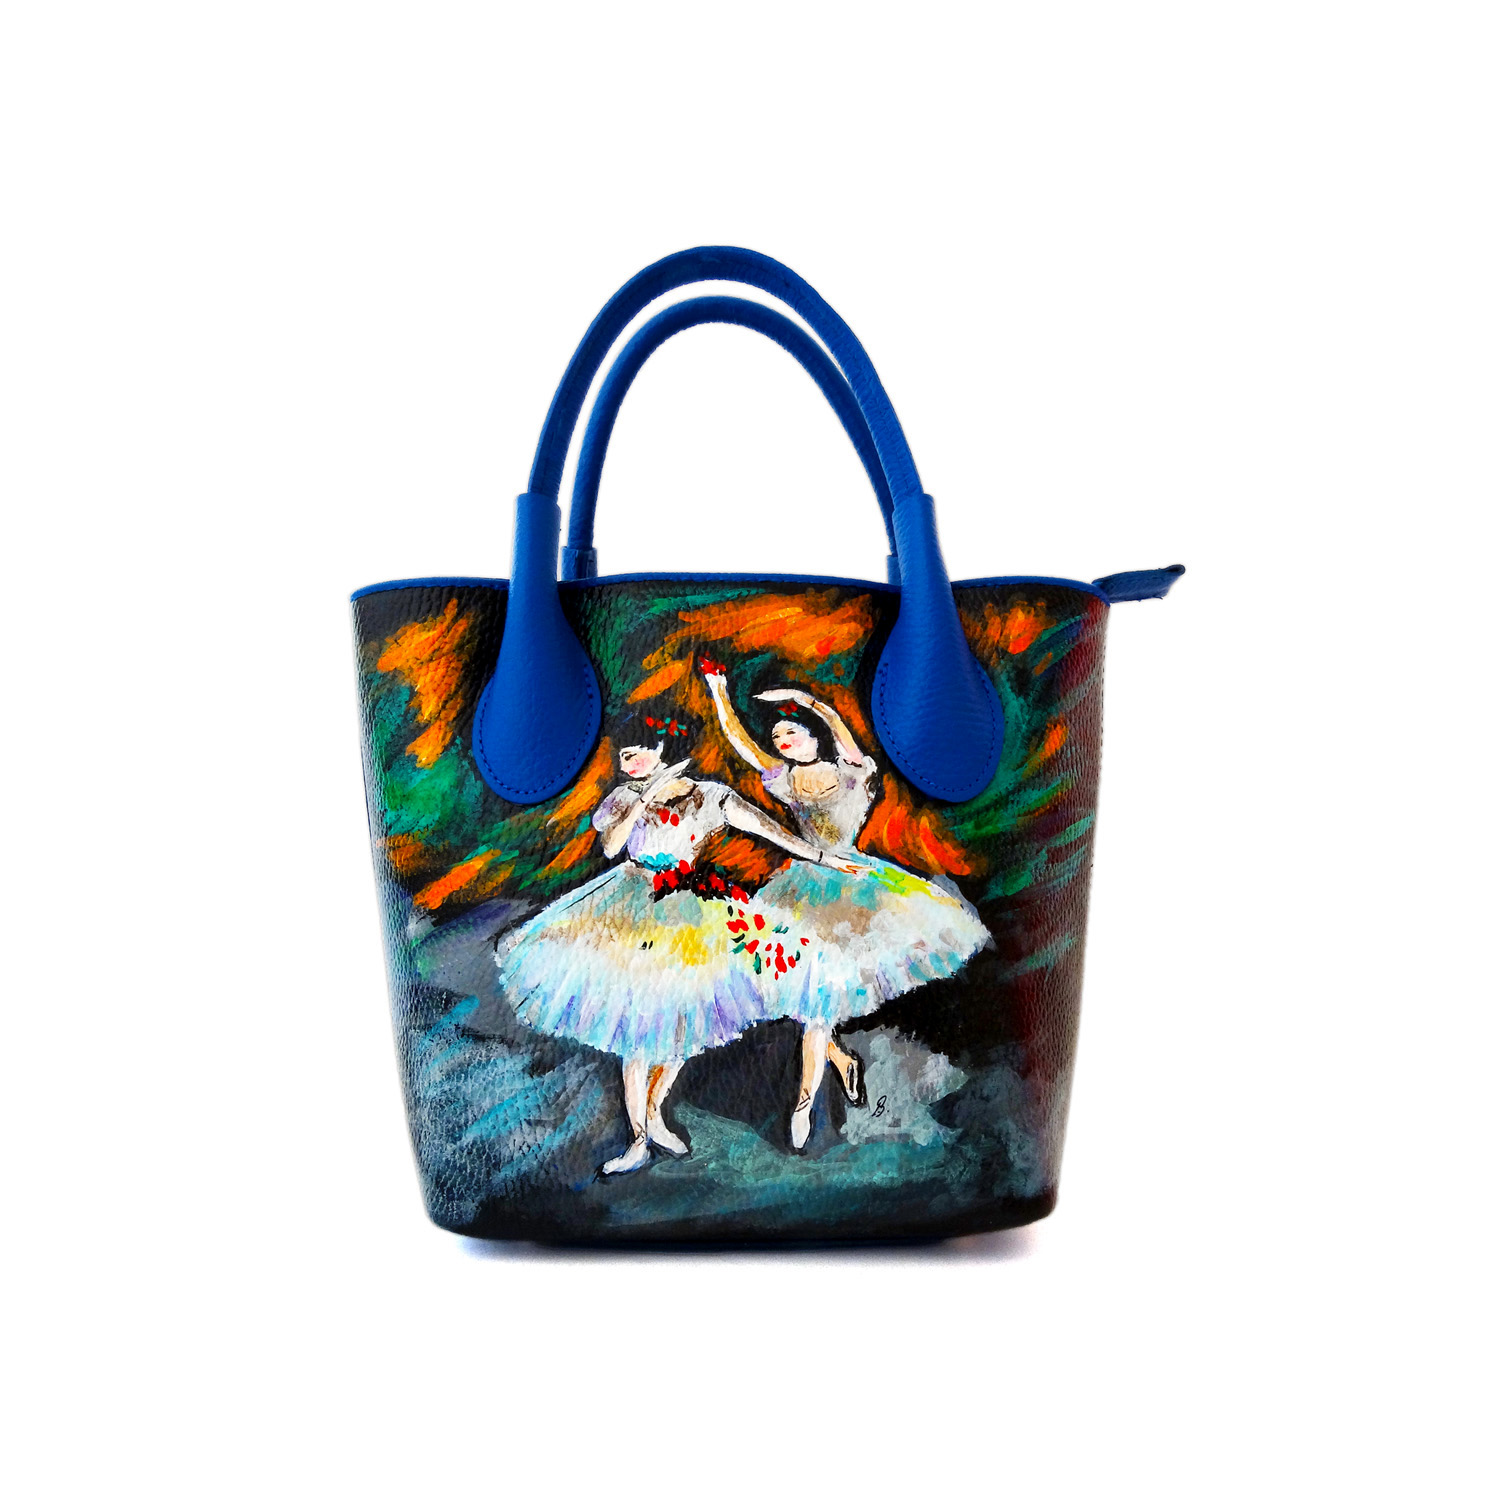 Hand-painted bag - The dancers by Degas